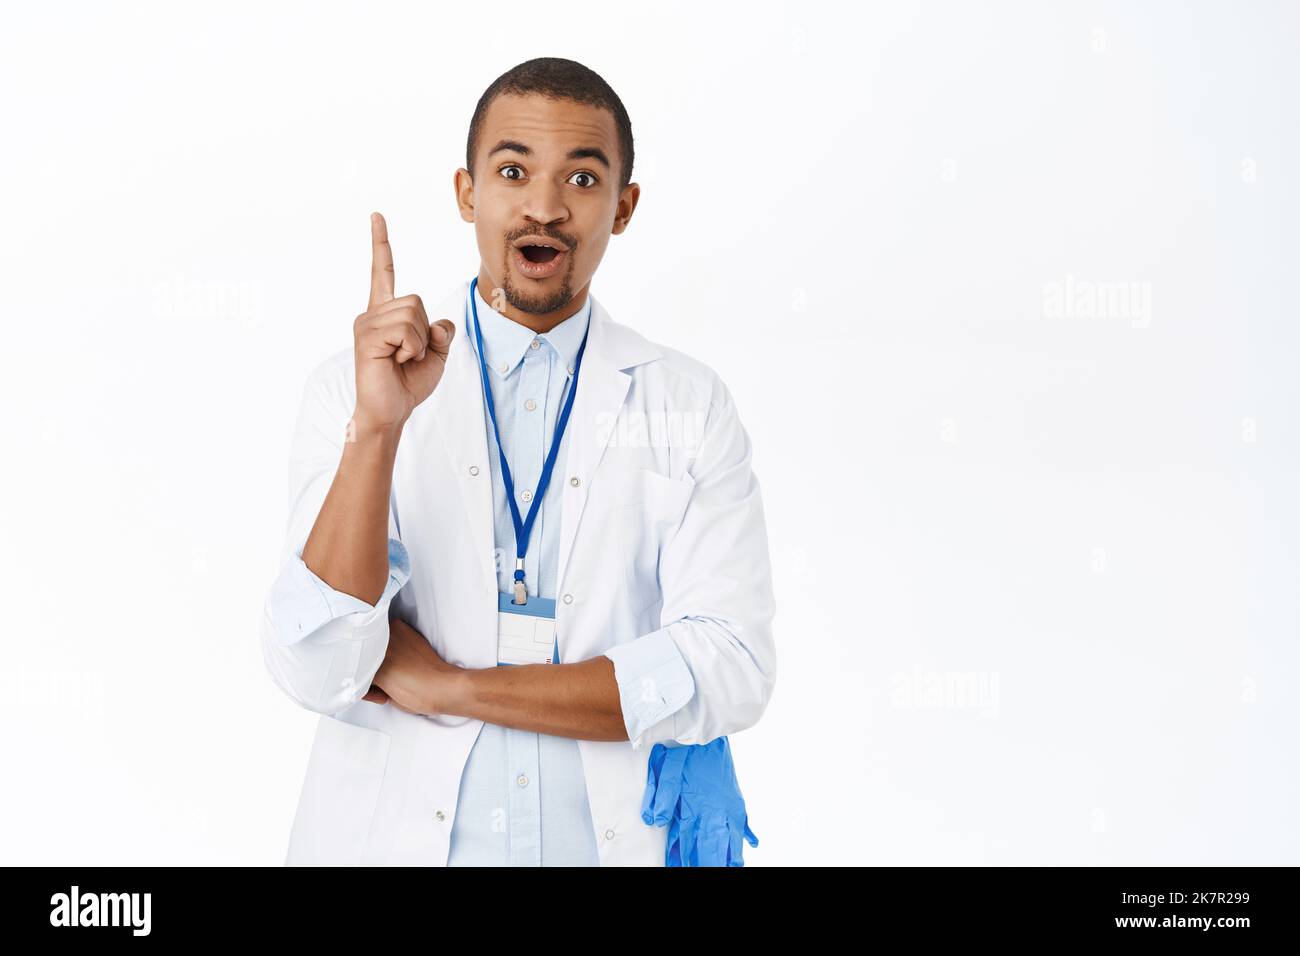 Arab doctor raise finger eureka gesture, saying suggestion, has an idea, standing over white background Stock Photo